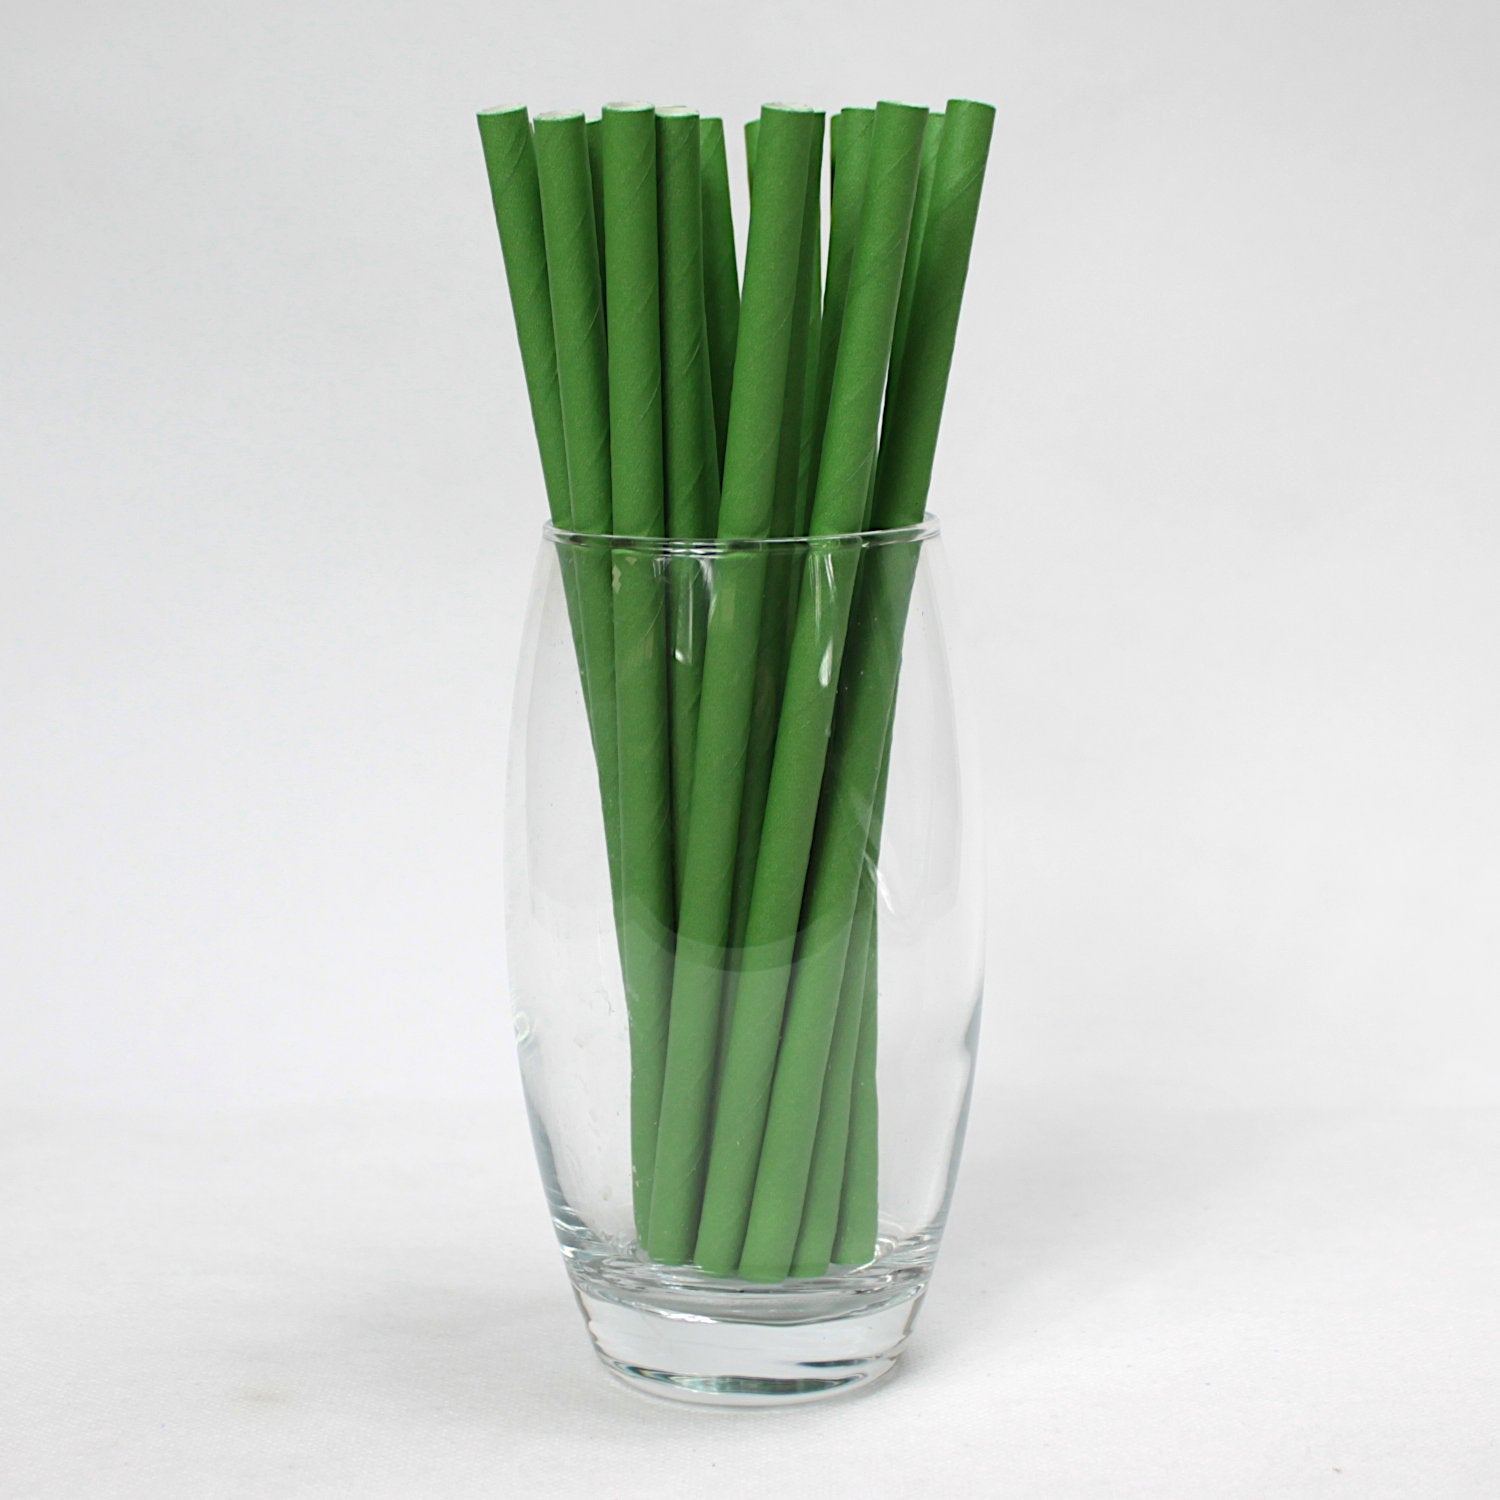 Green Paper Straws (8mm x 200mm) - Quality Drinking Straws for Smoothies and Milkshakes - Intrinsic Paper Straws